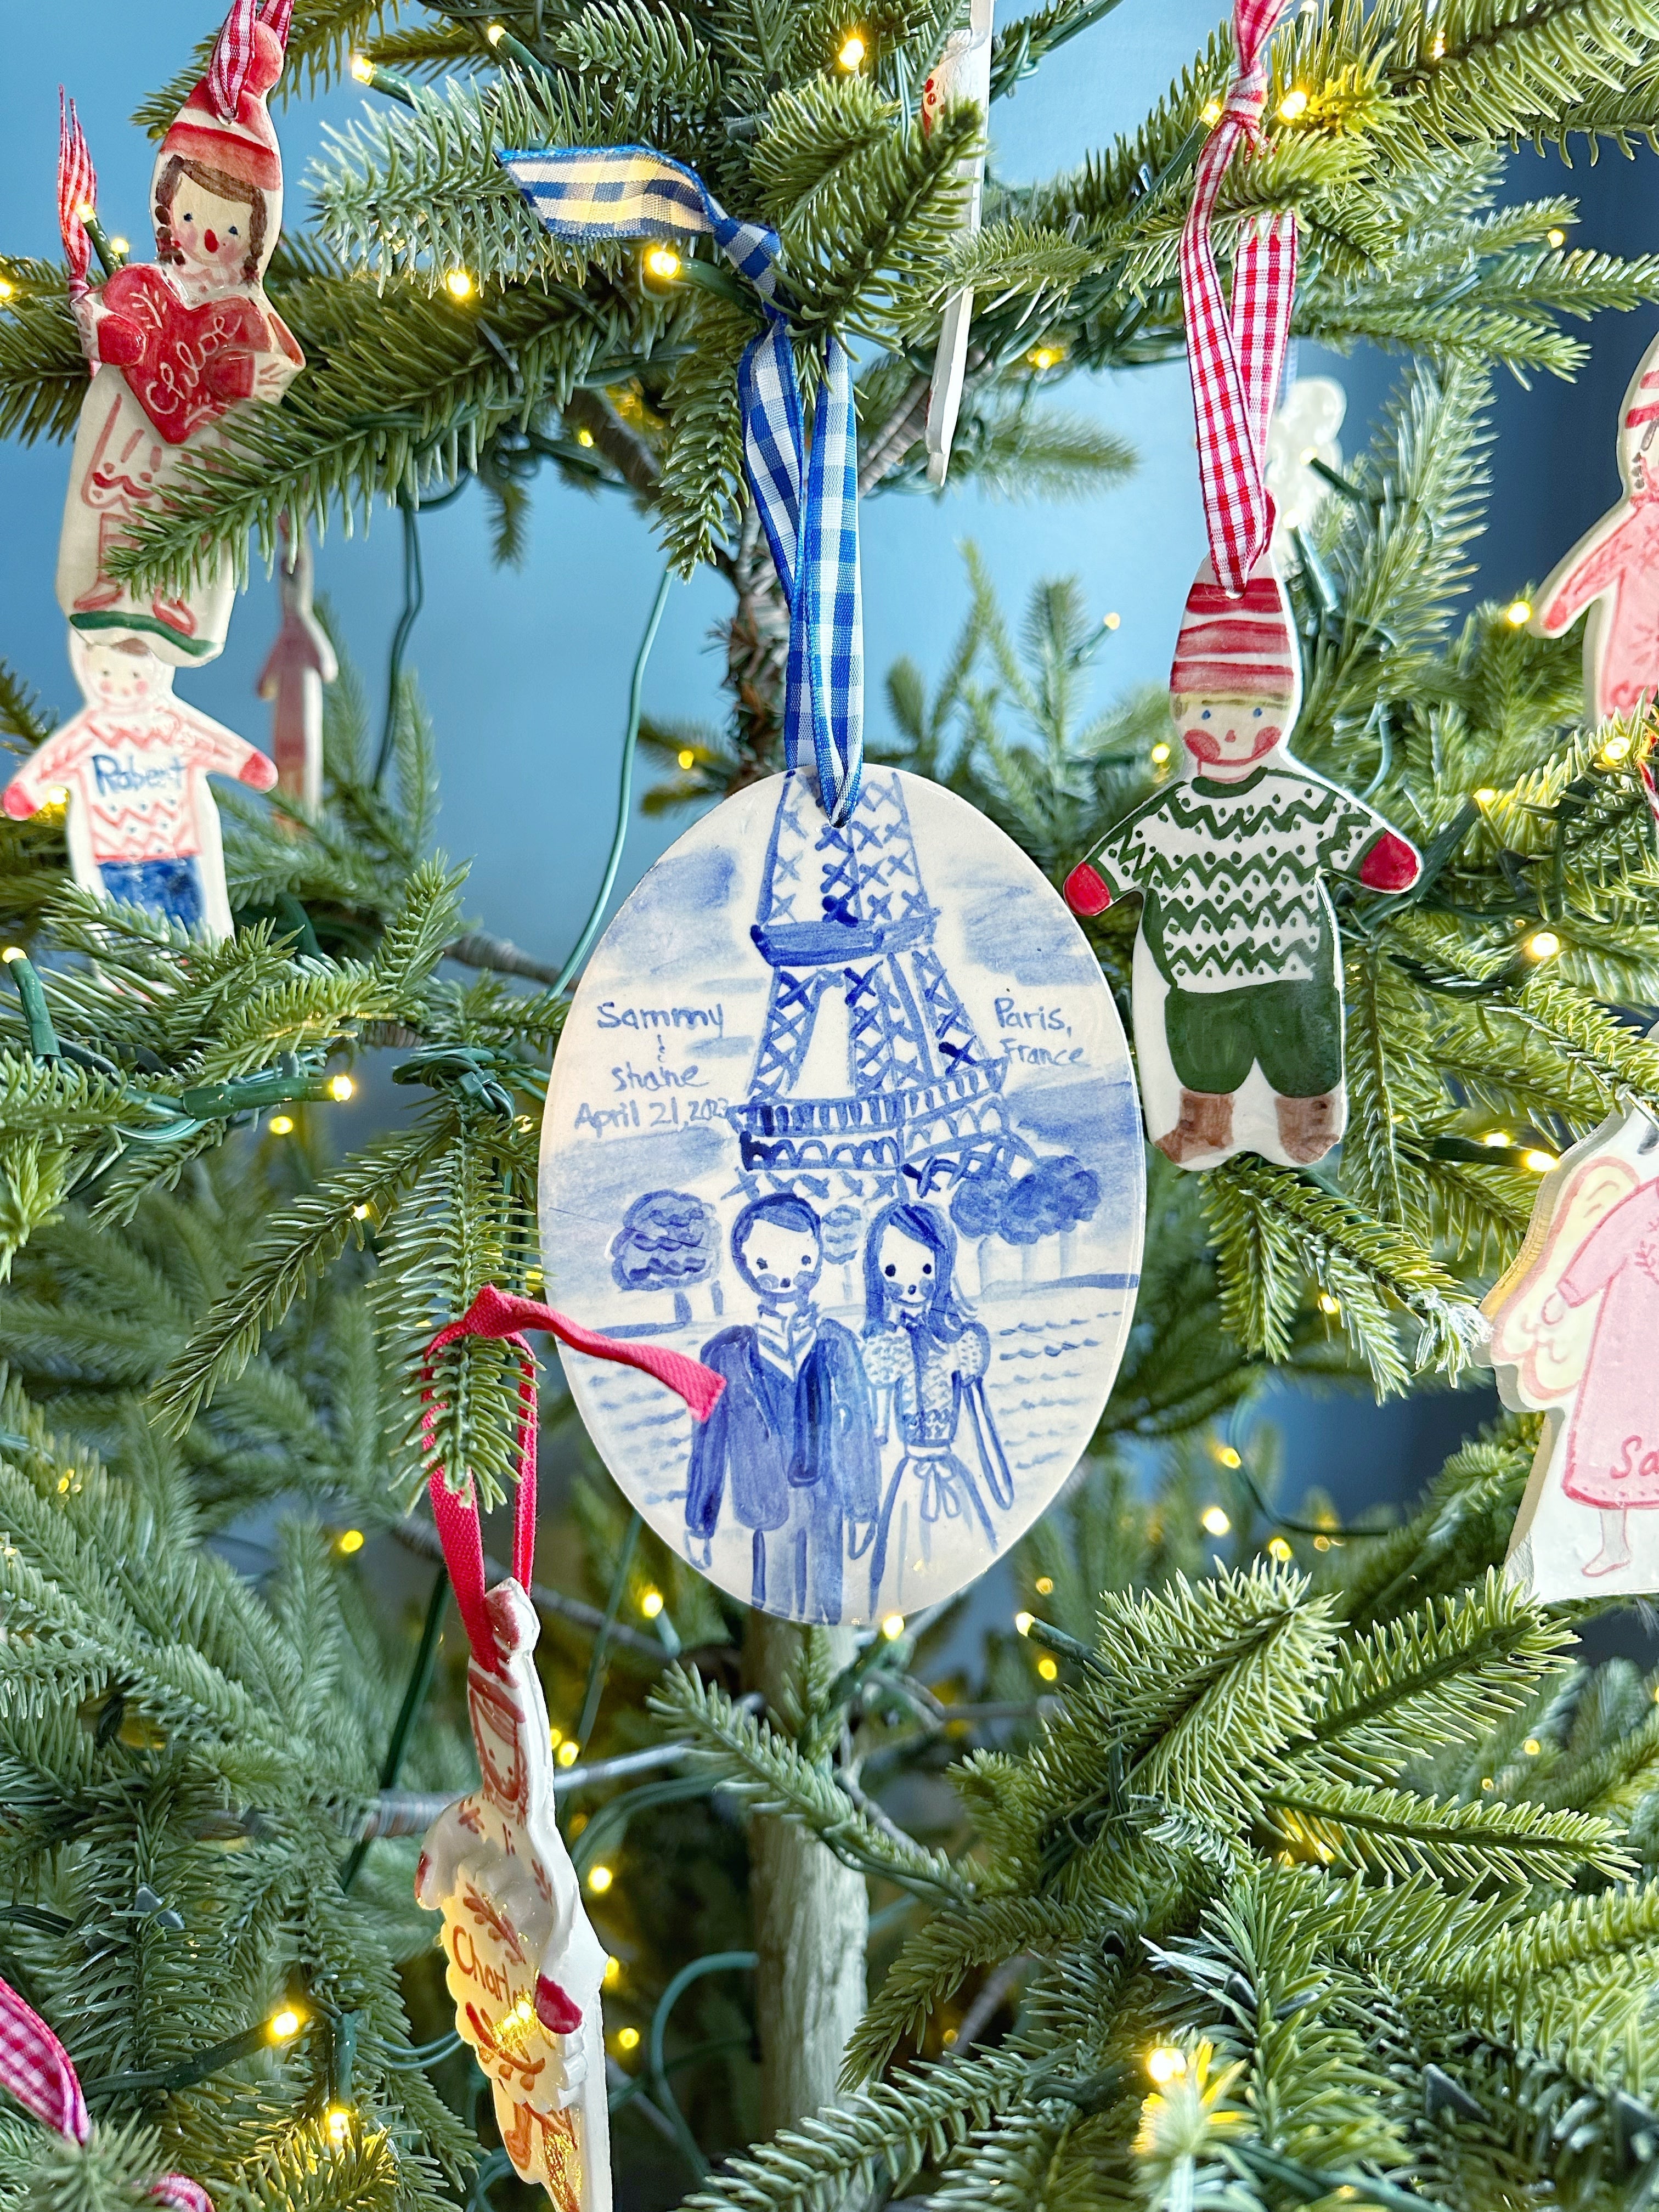 Engagement ornament - full color - Premium  from Tricia Lowenfield Design 